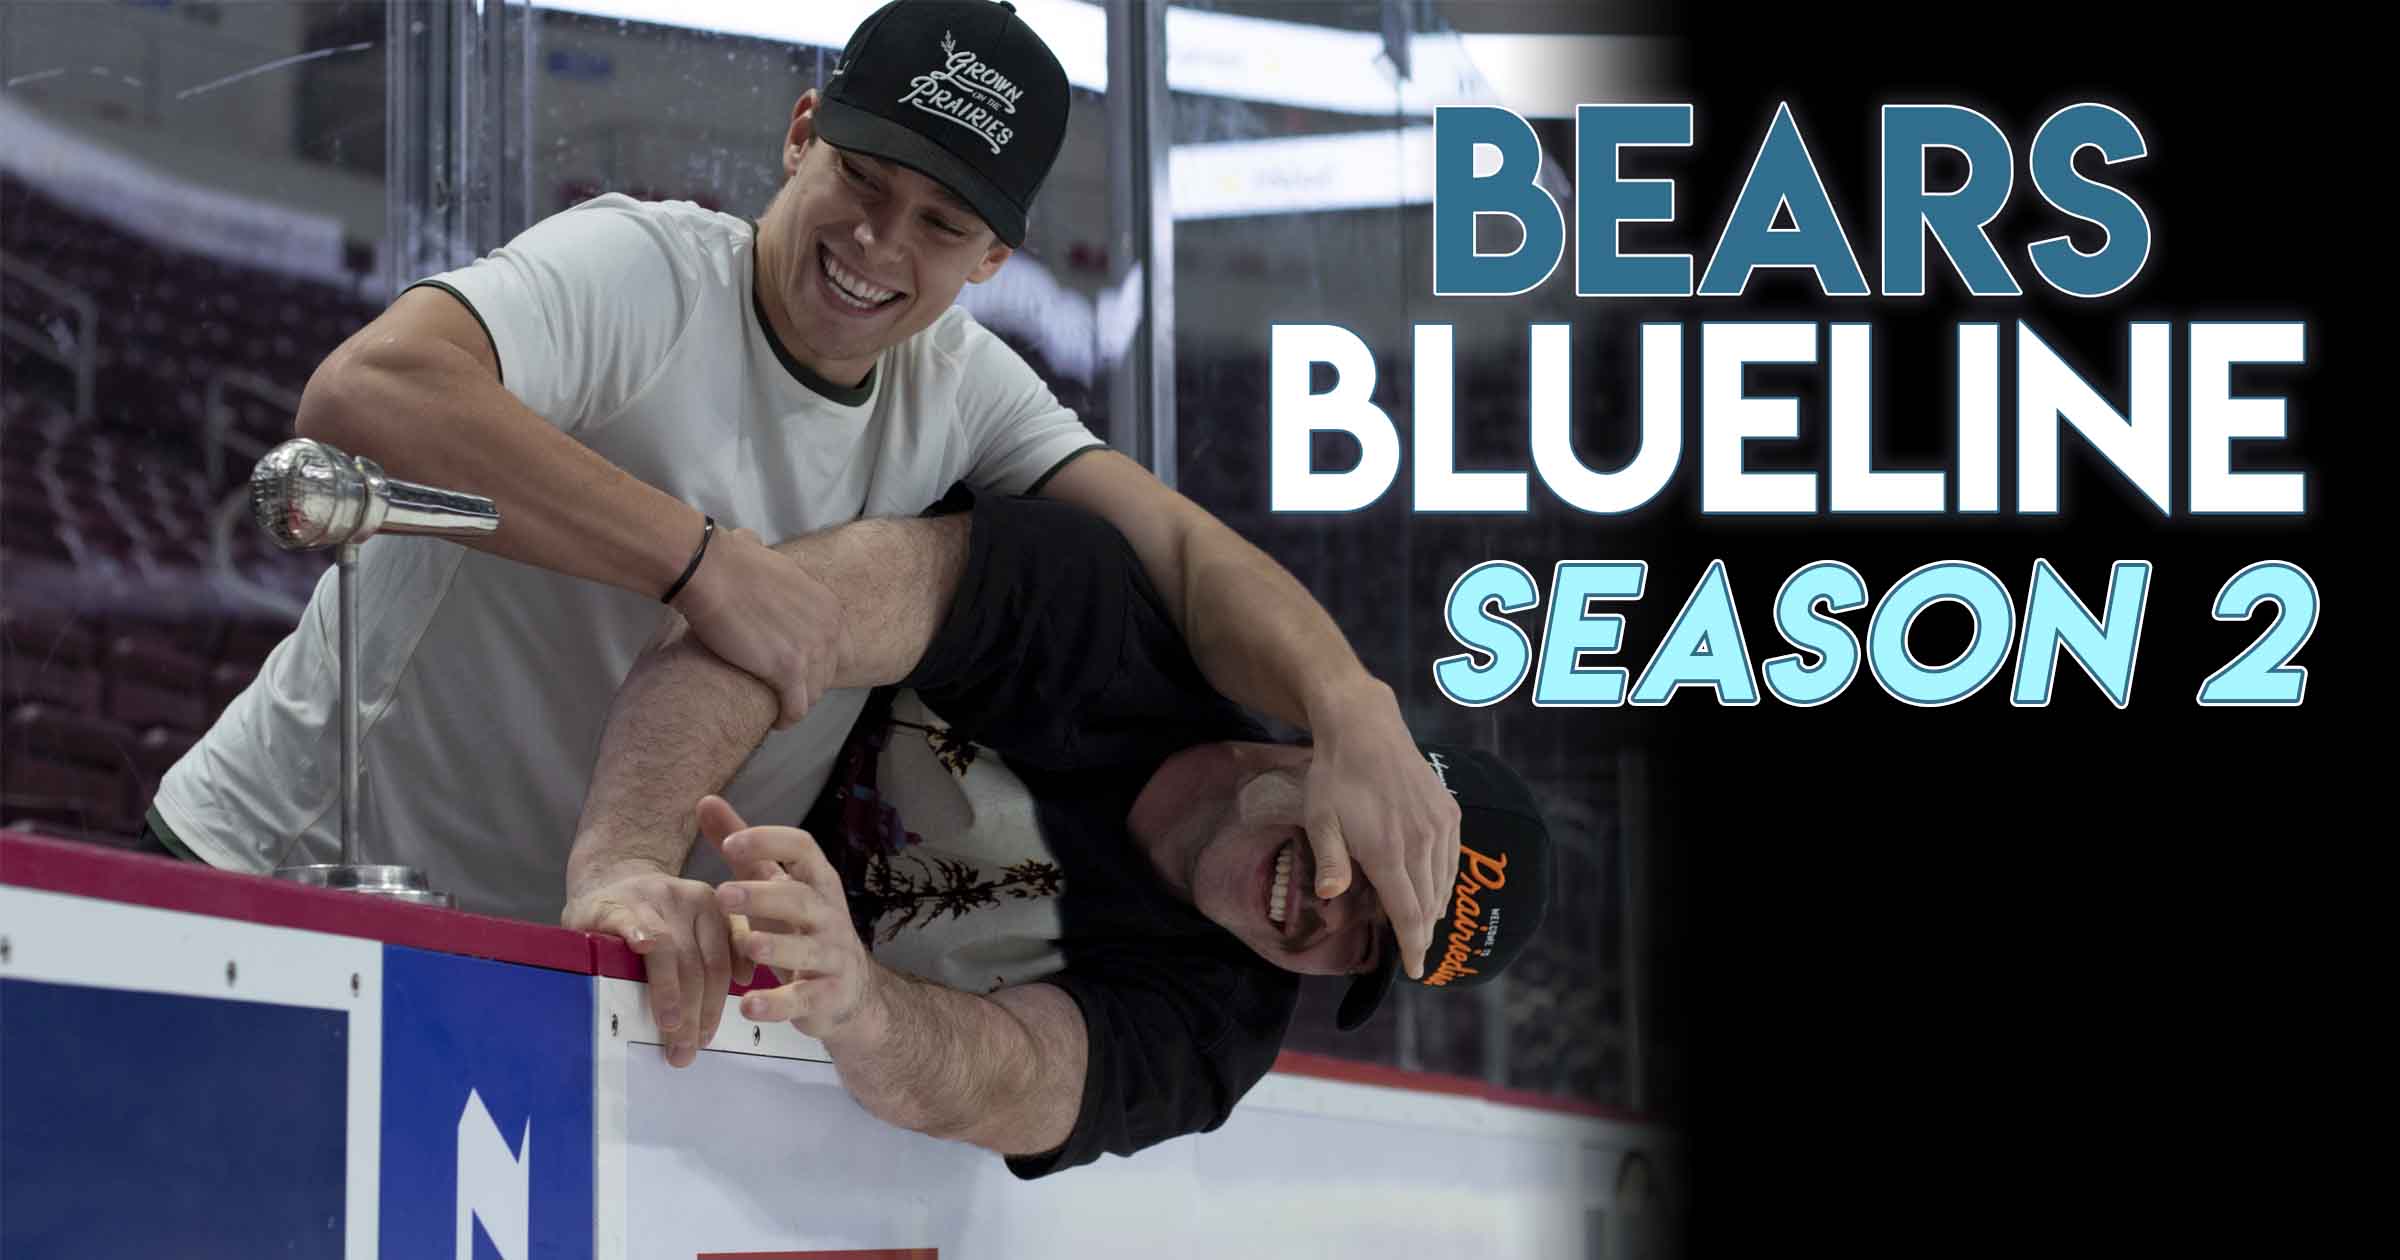 New Episode Of Bears Blueline Features Hilarious Road Trip Stories